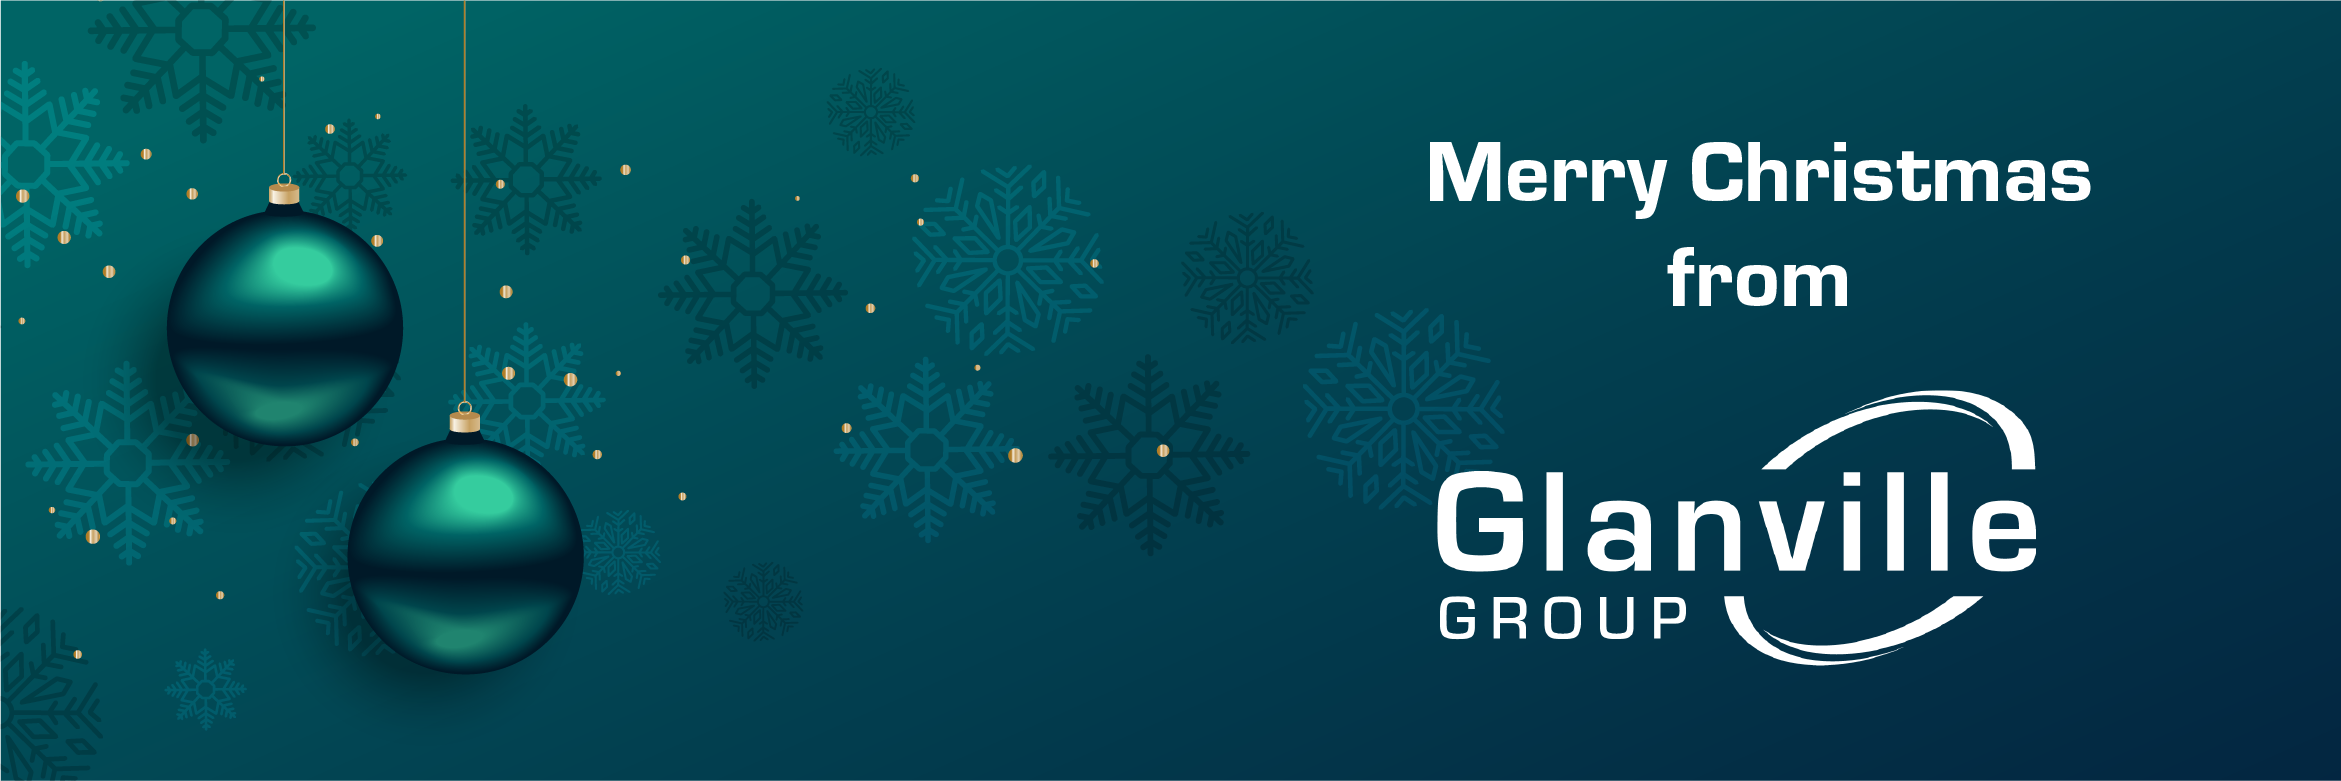 Merry Christmas from Glanville Group